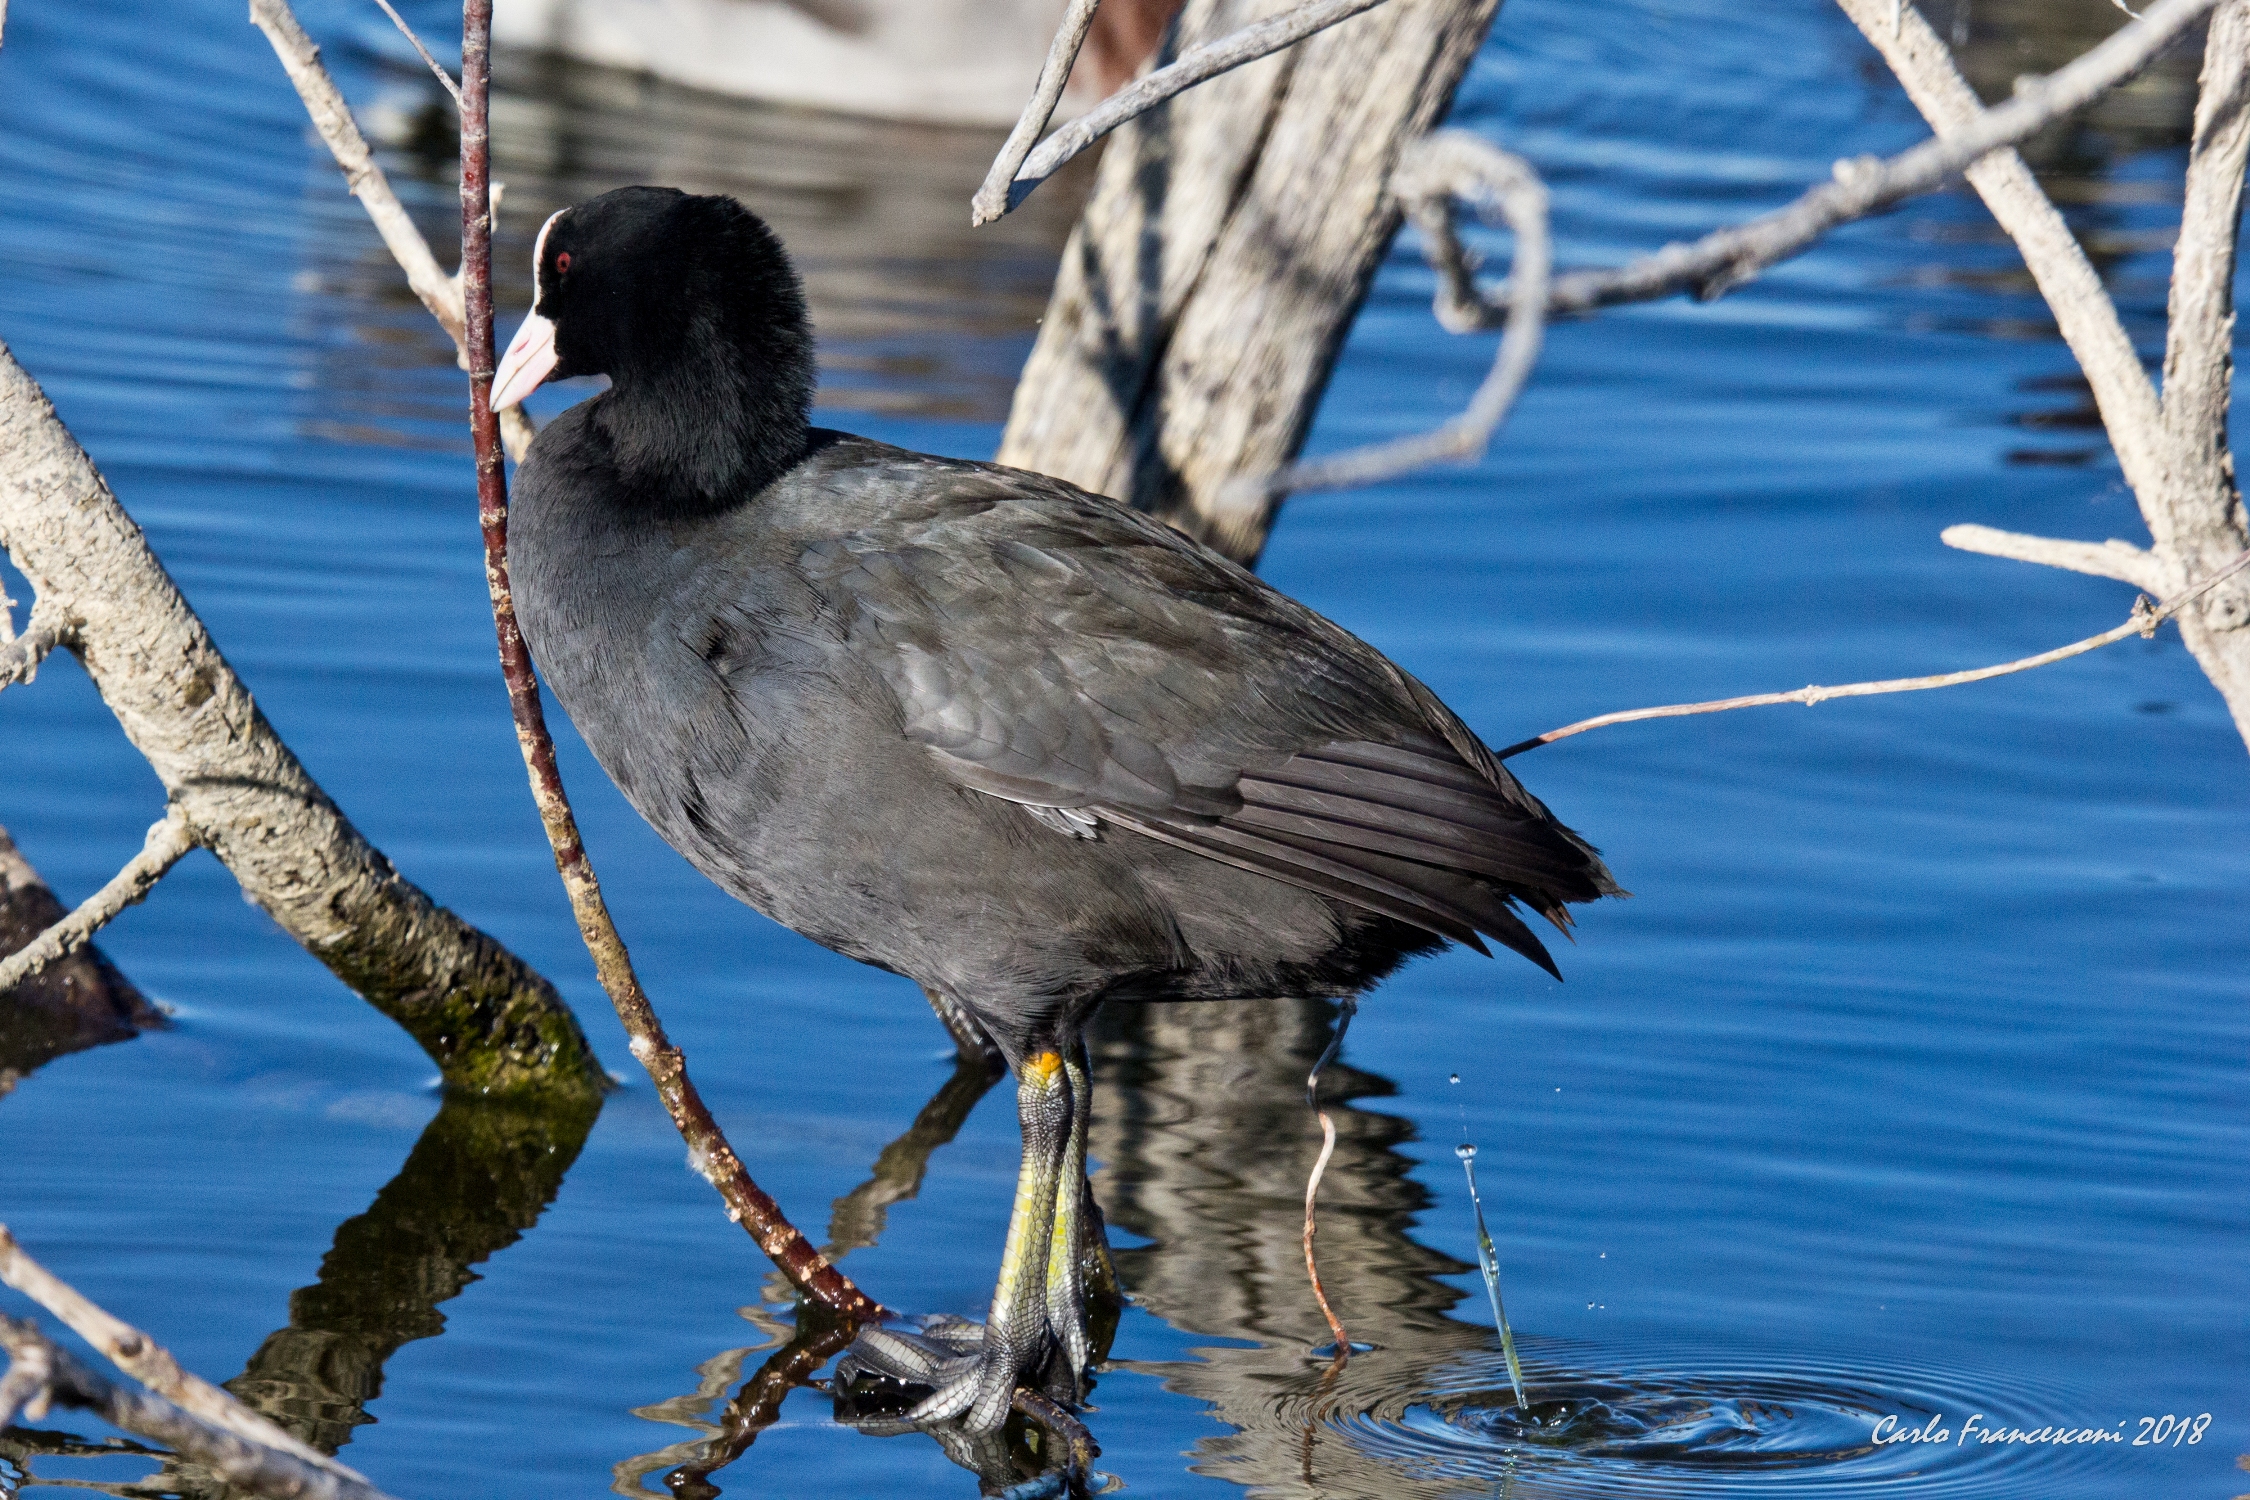 Dirty and Rude Coot...